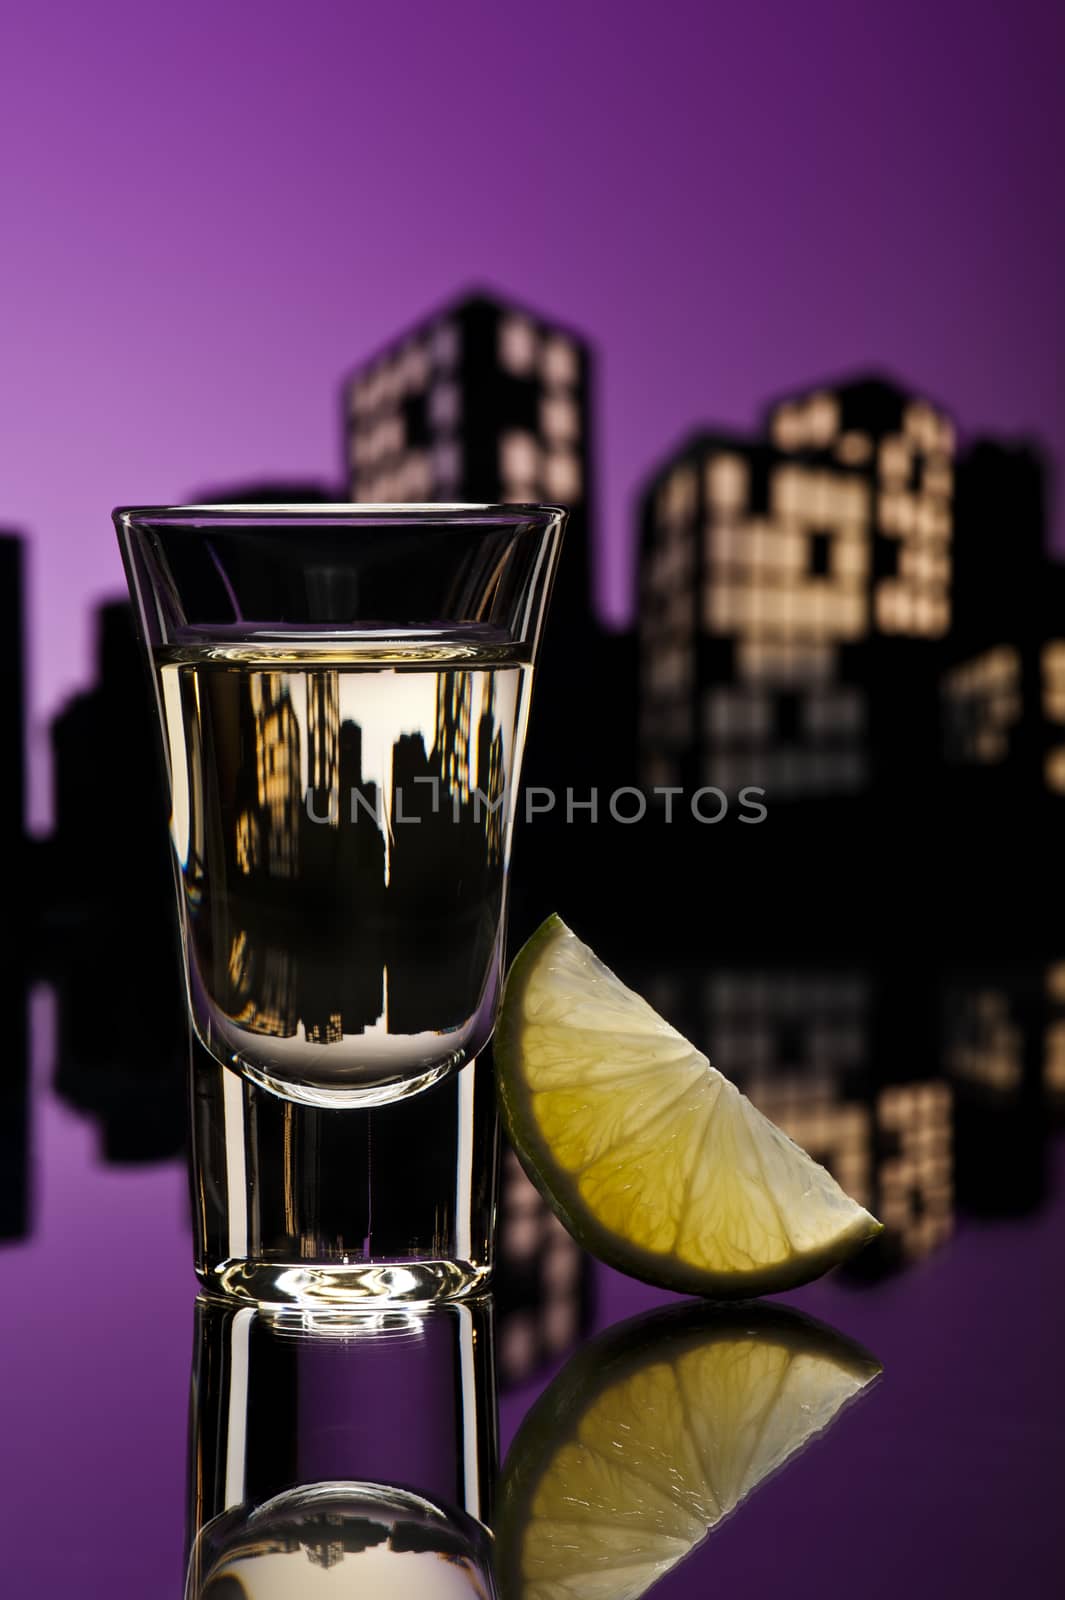 Tequila shoot in colorfull cityscape setting